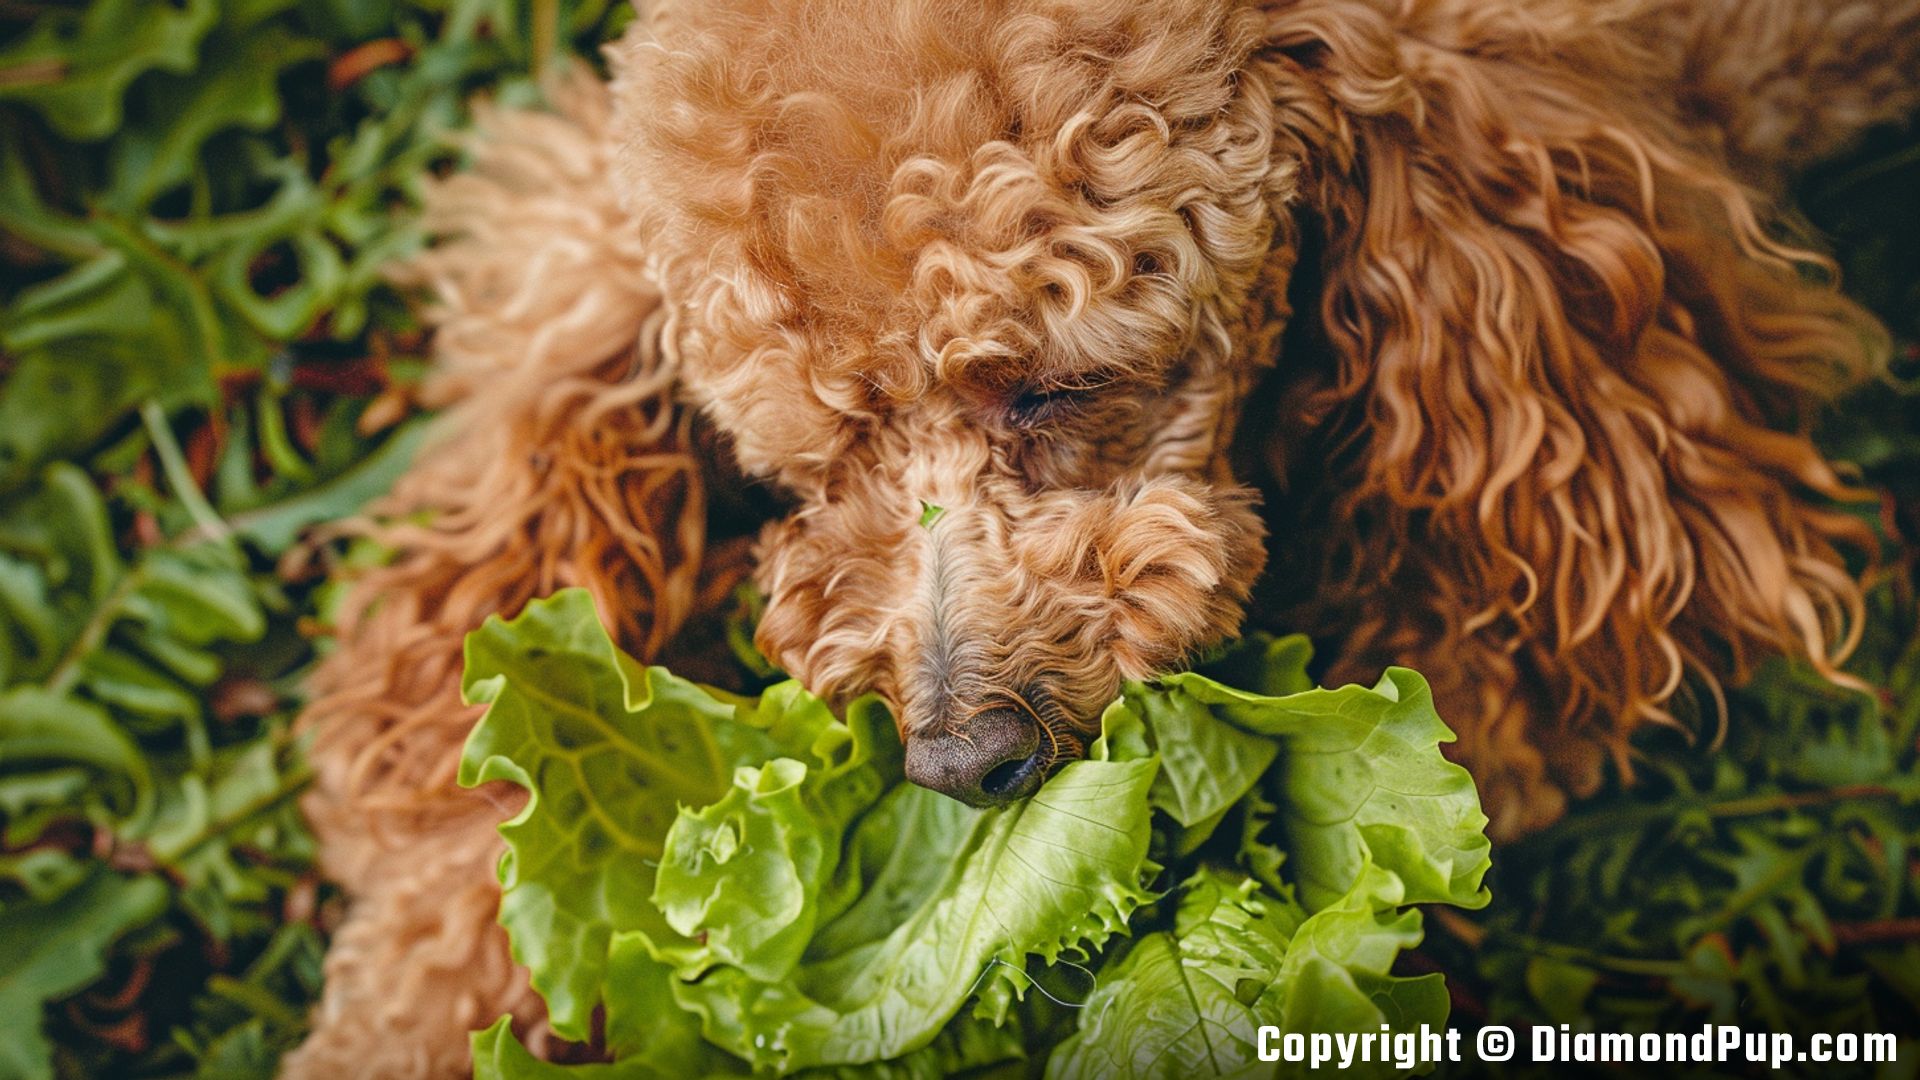 Image of a Happy Poodle Snacking on Lettuce